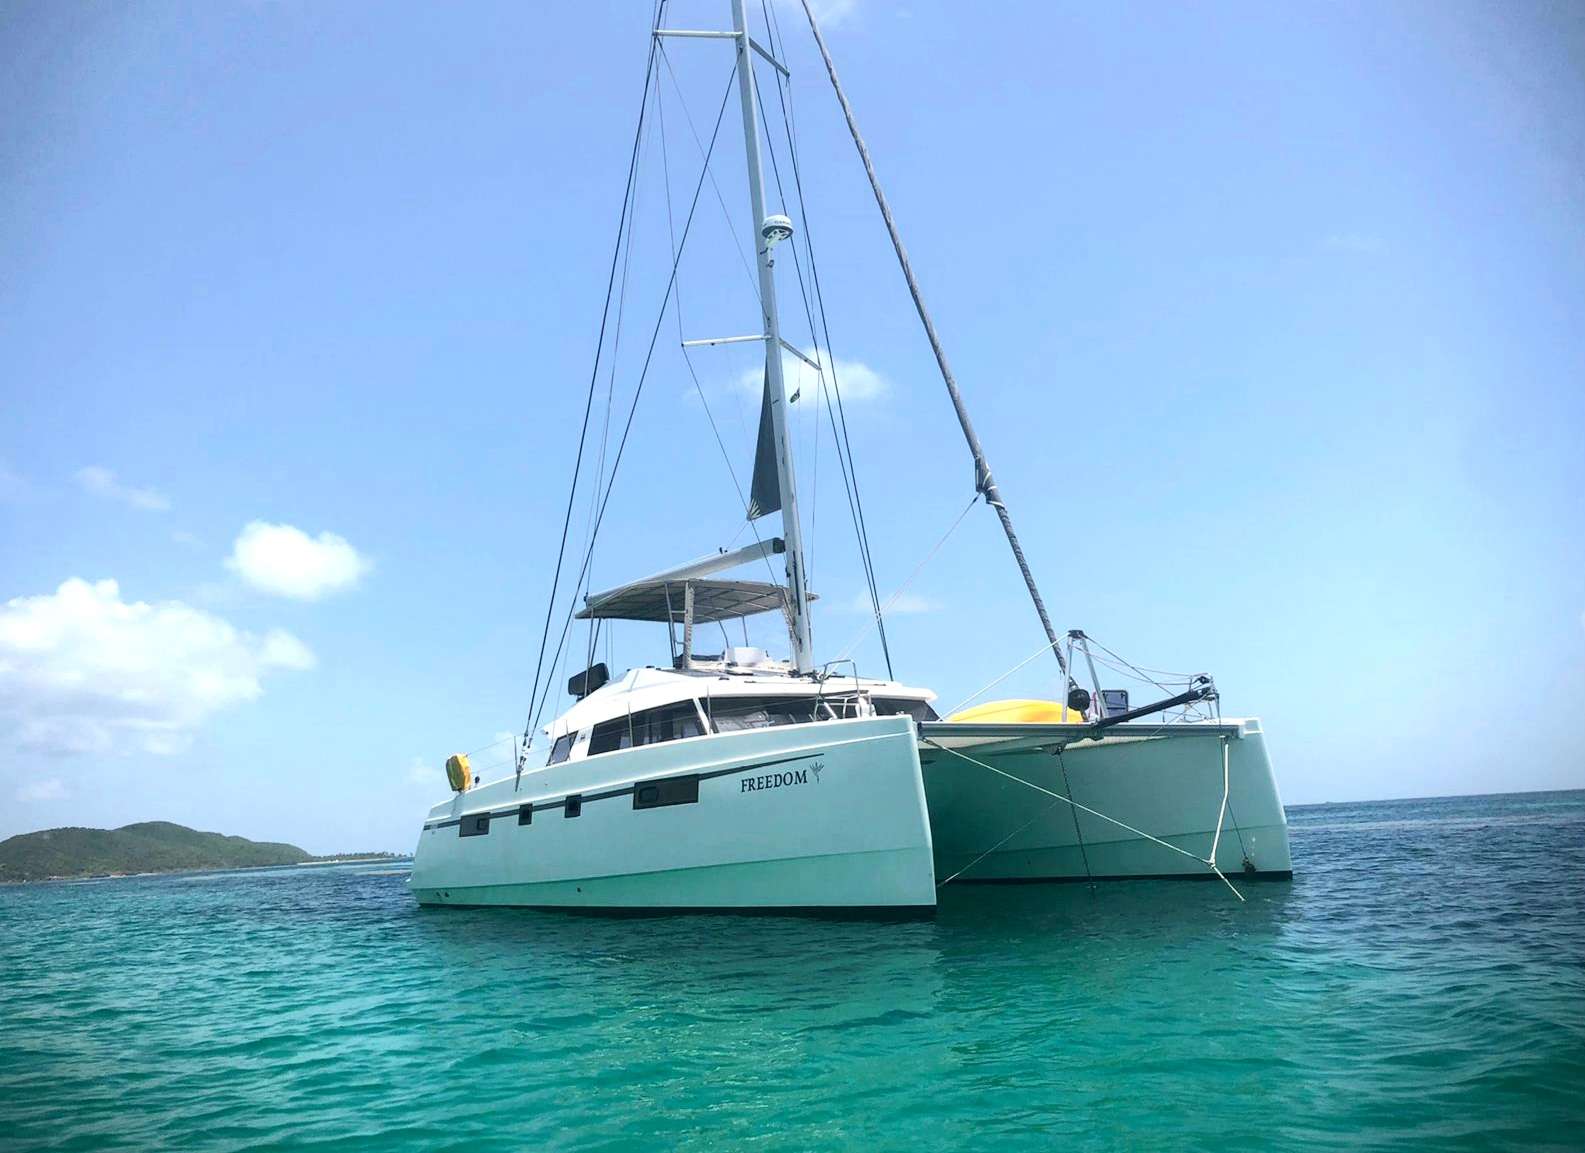 Freedom - Luxury yacht charter St Martin & Boat hire in Caribbean 1